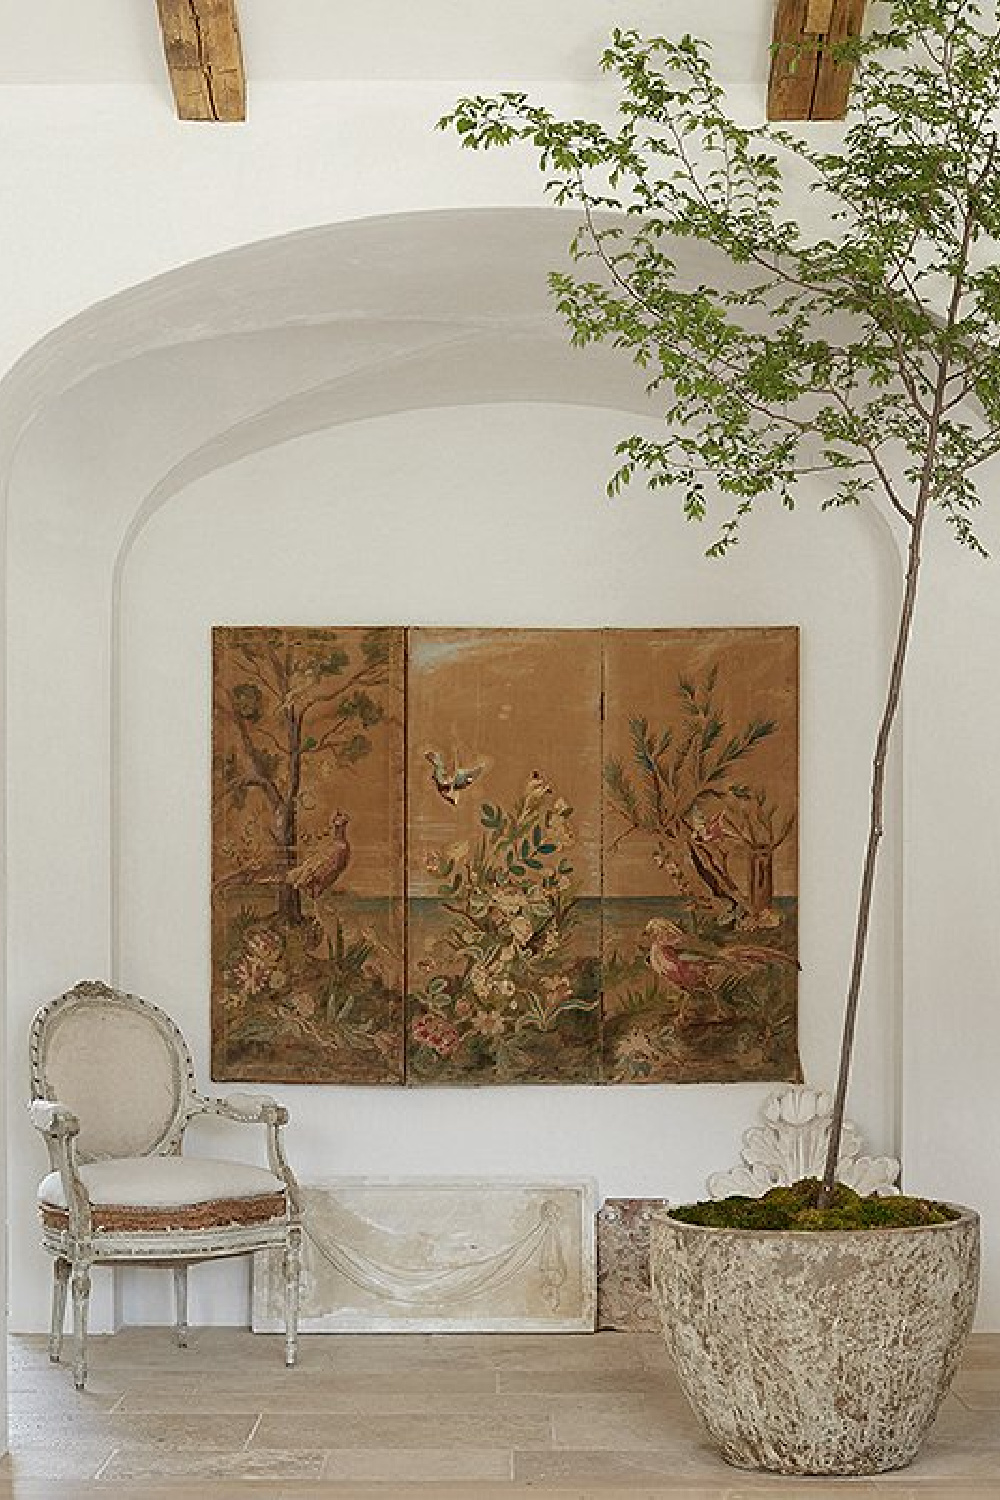 Tapestry and potted tree - Patina Farm (Brooke Giannetti) European country farmhouse in Ojai. #patinafarm #oldworldstyle